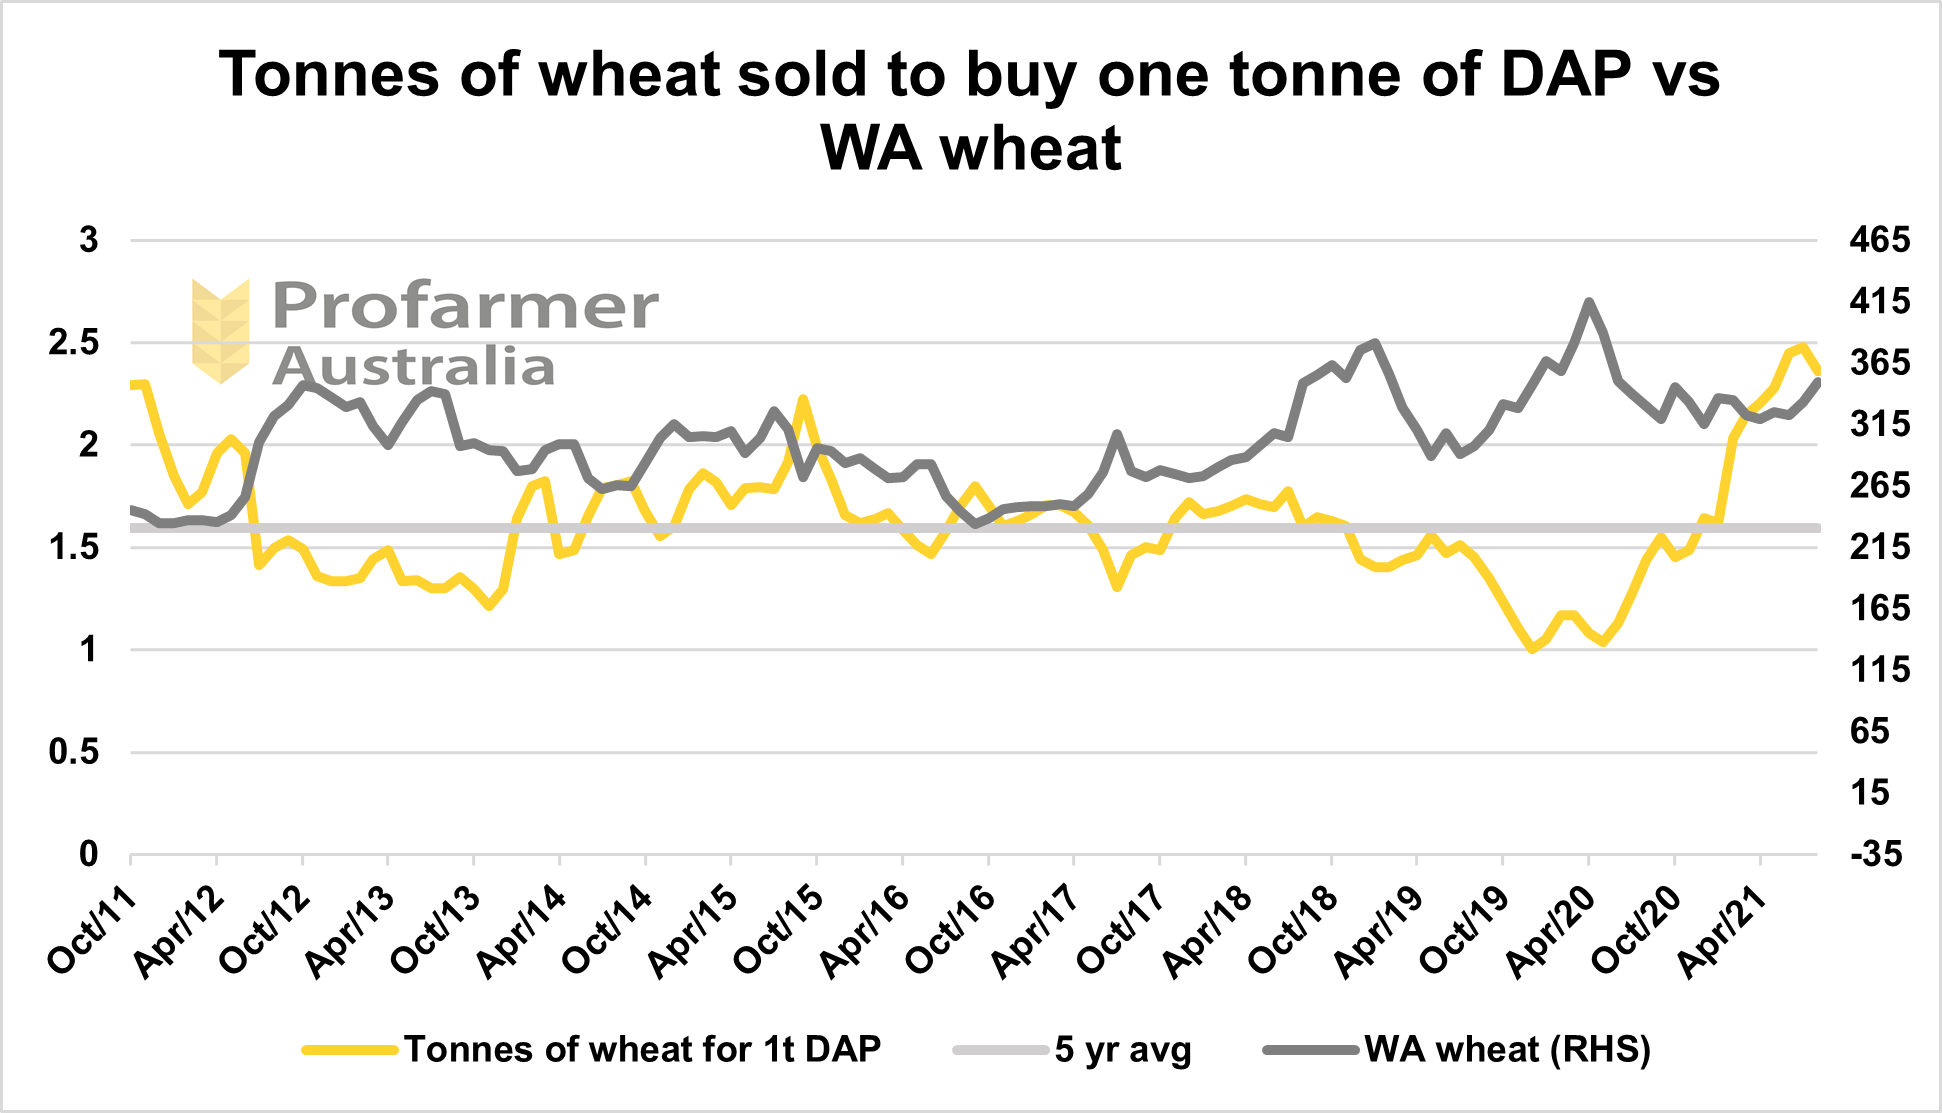 Graph showing tonnes of wheat sold to buy 1 tonne of DAP vs WA wheat against a five year average.  The tonnes of wheat sold to purchase DAP fertiliser has risen from 1 tonne in late 2020 to almost 2.5 tonnes by mid 2021. This is well above the 5 year average.